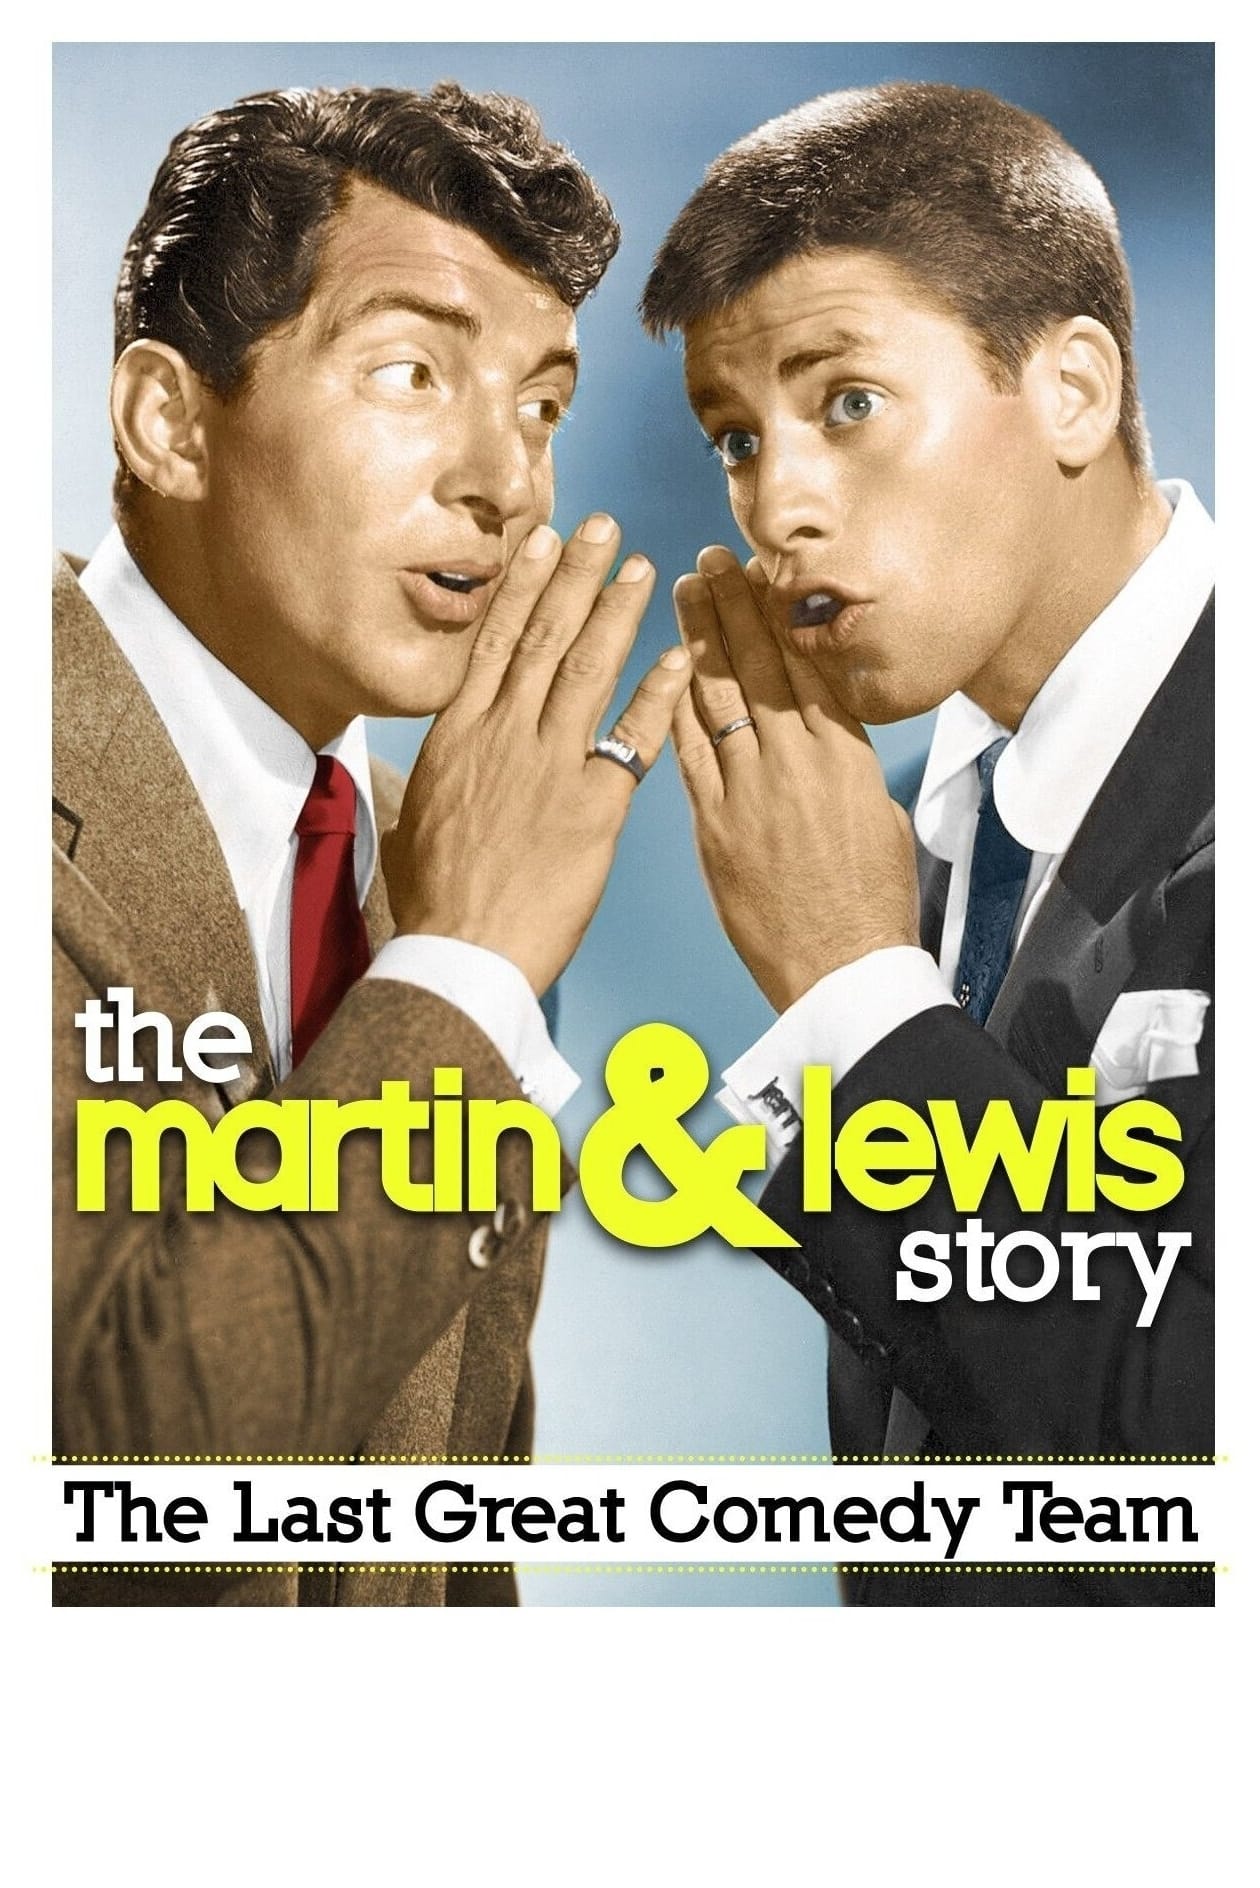 The Martin & Lewis Story: The Last Great Comedy Team (1992)